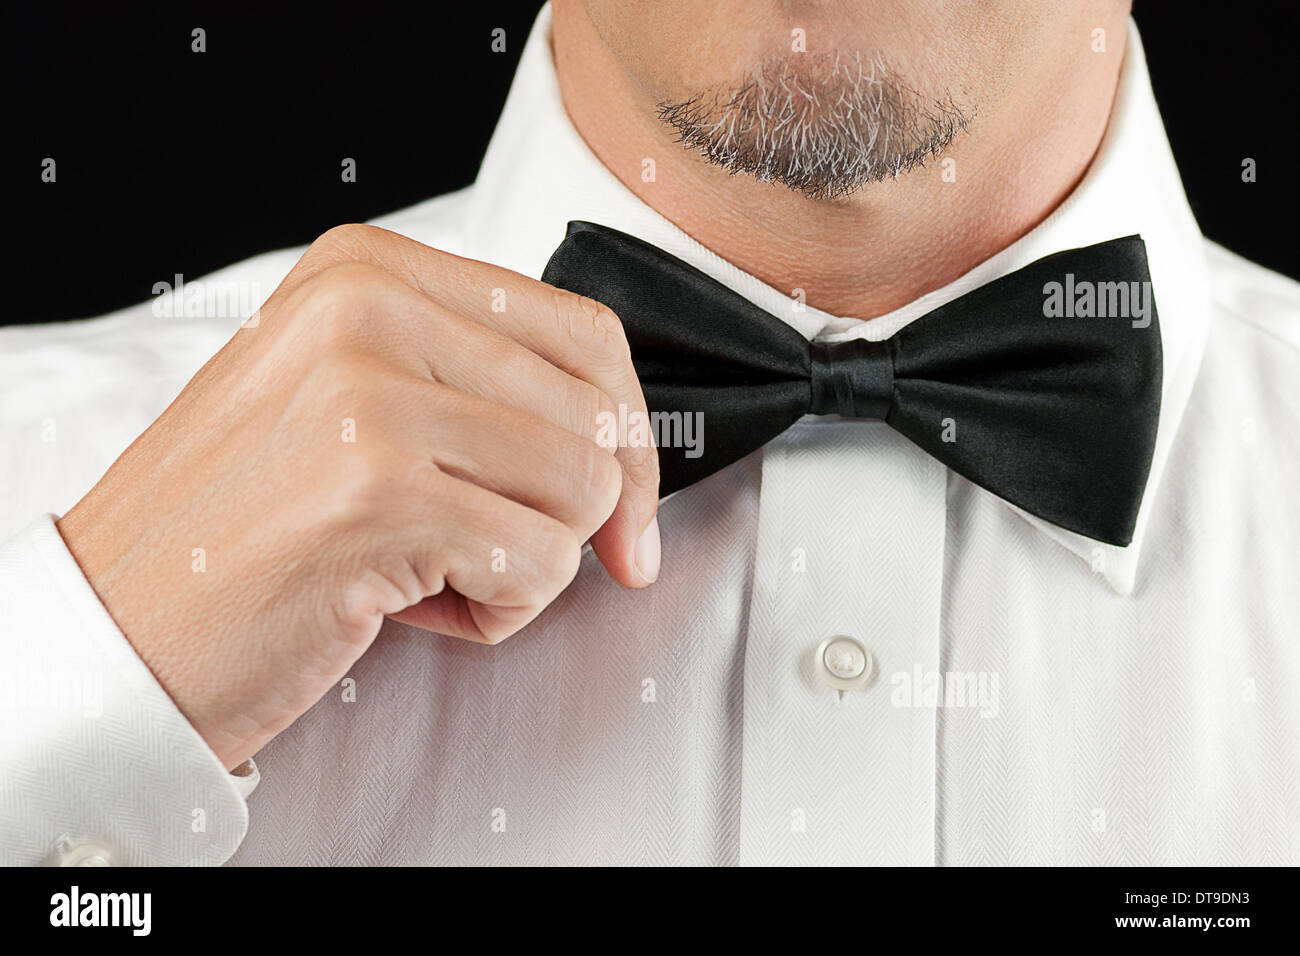 Close-up of a man in a tux straightening his bowtie, one hand, no jacket. Stock Photo